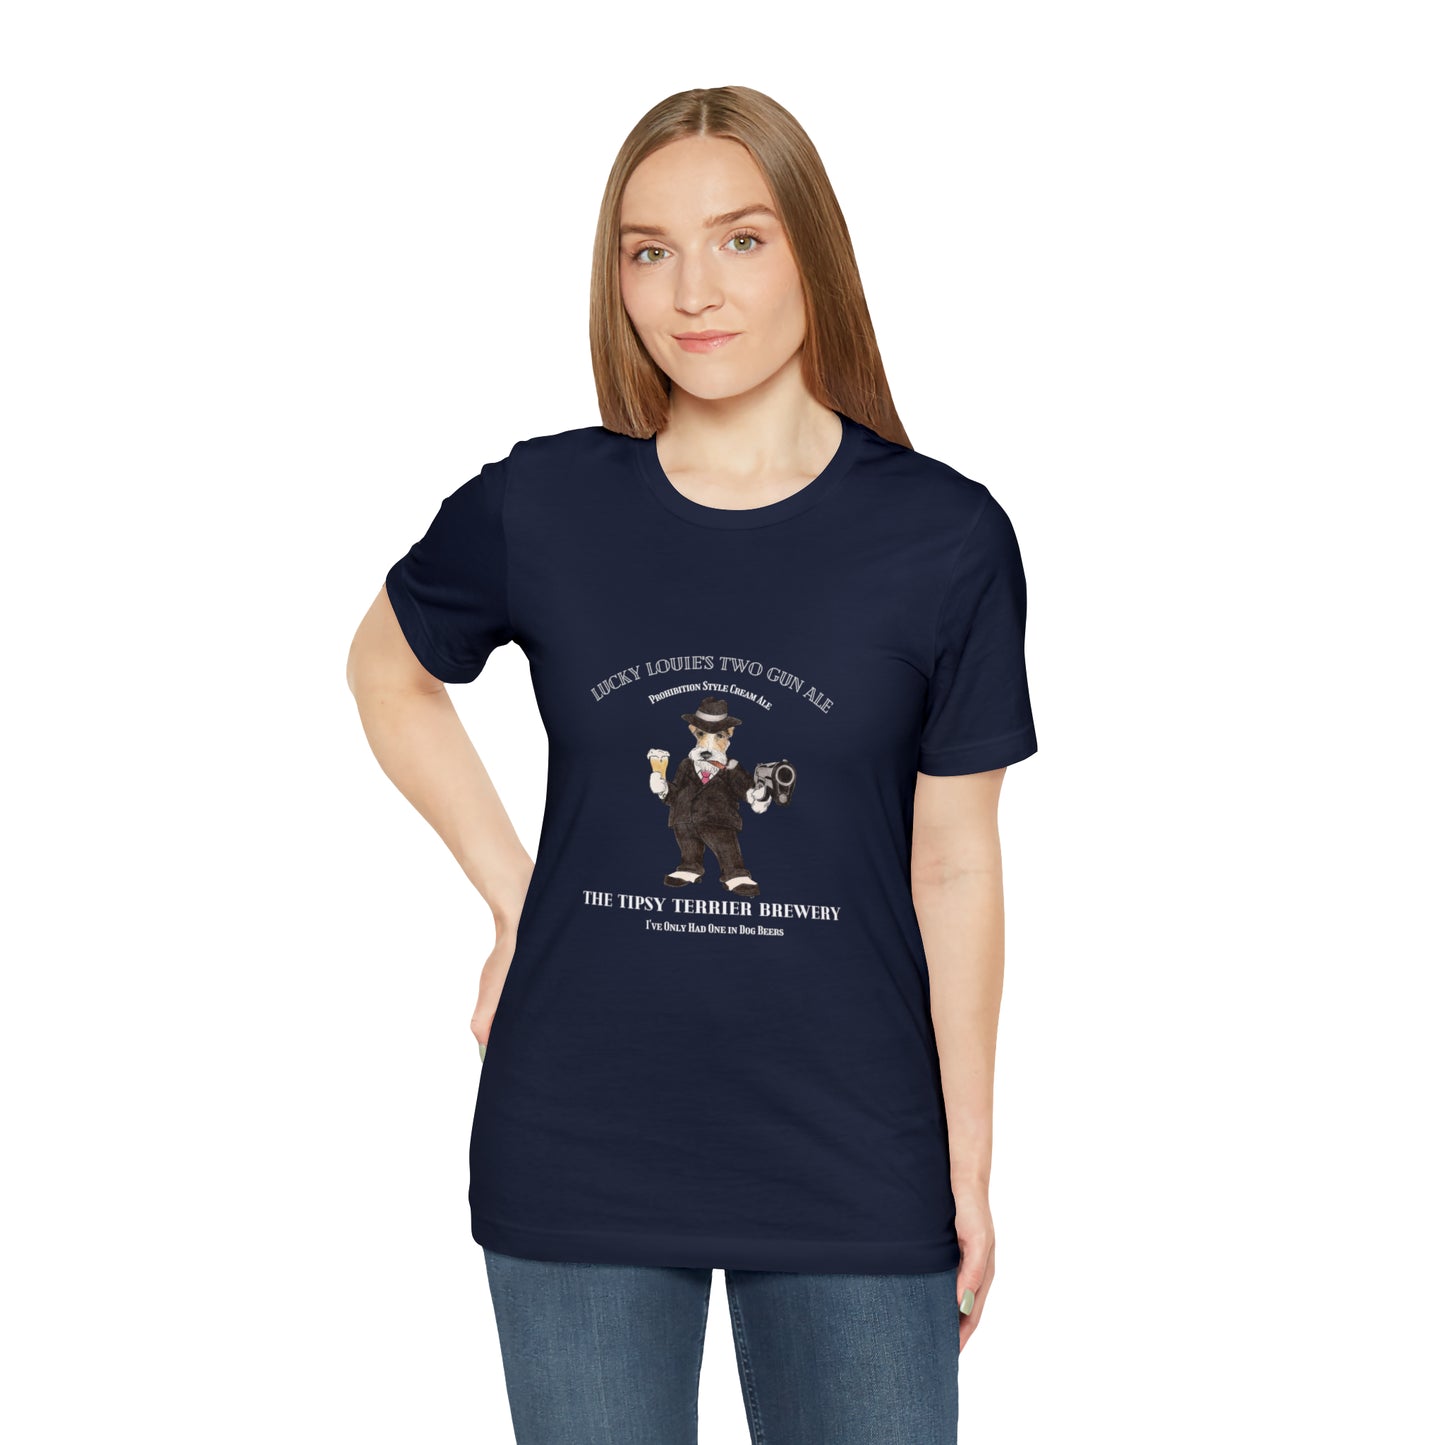 Tipsy Terrier Lucky Louie's Two Gun Ale T-Shirt